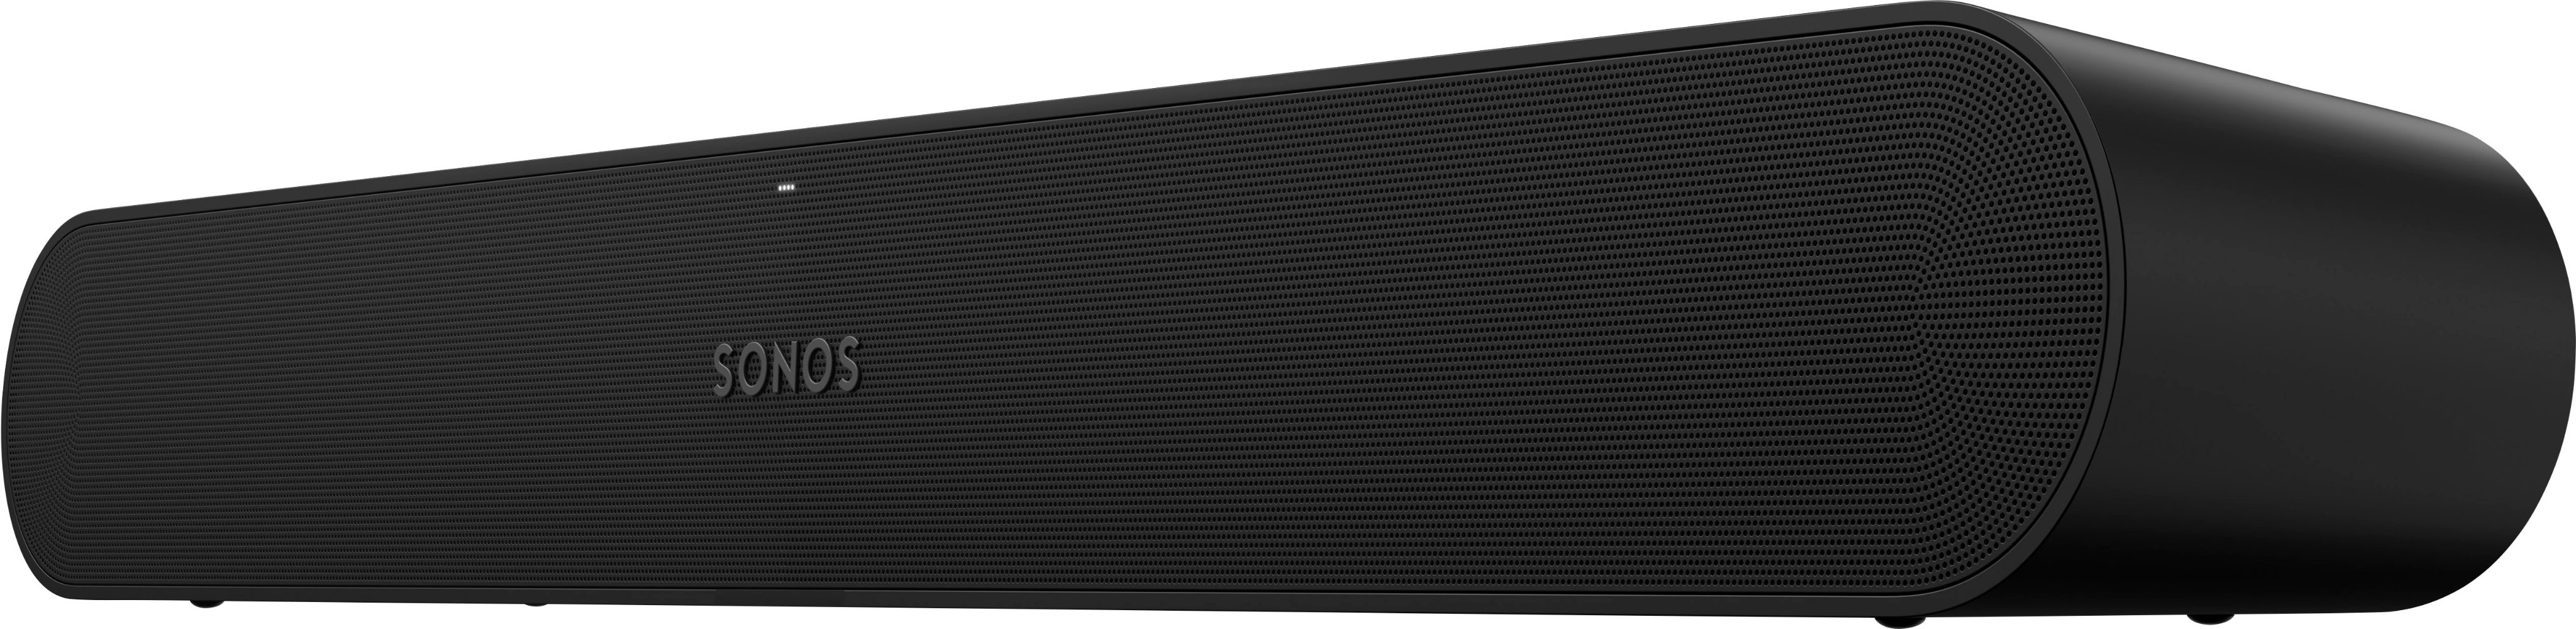 SONOS RAY BLACK | Powered Sound Bar/wireless music system with Apple AirPlay® 2 (Black), Each